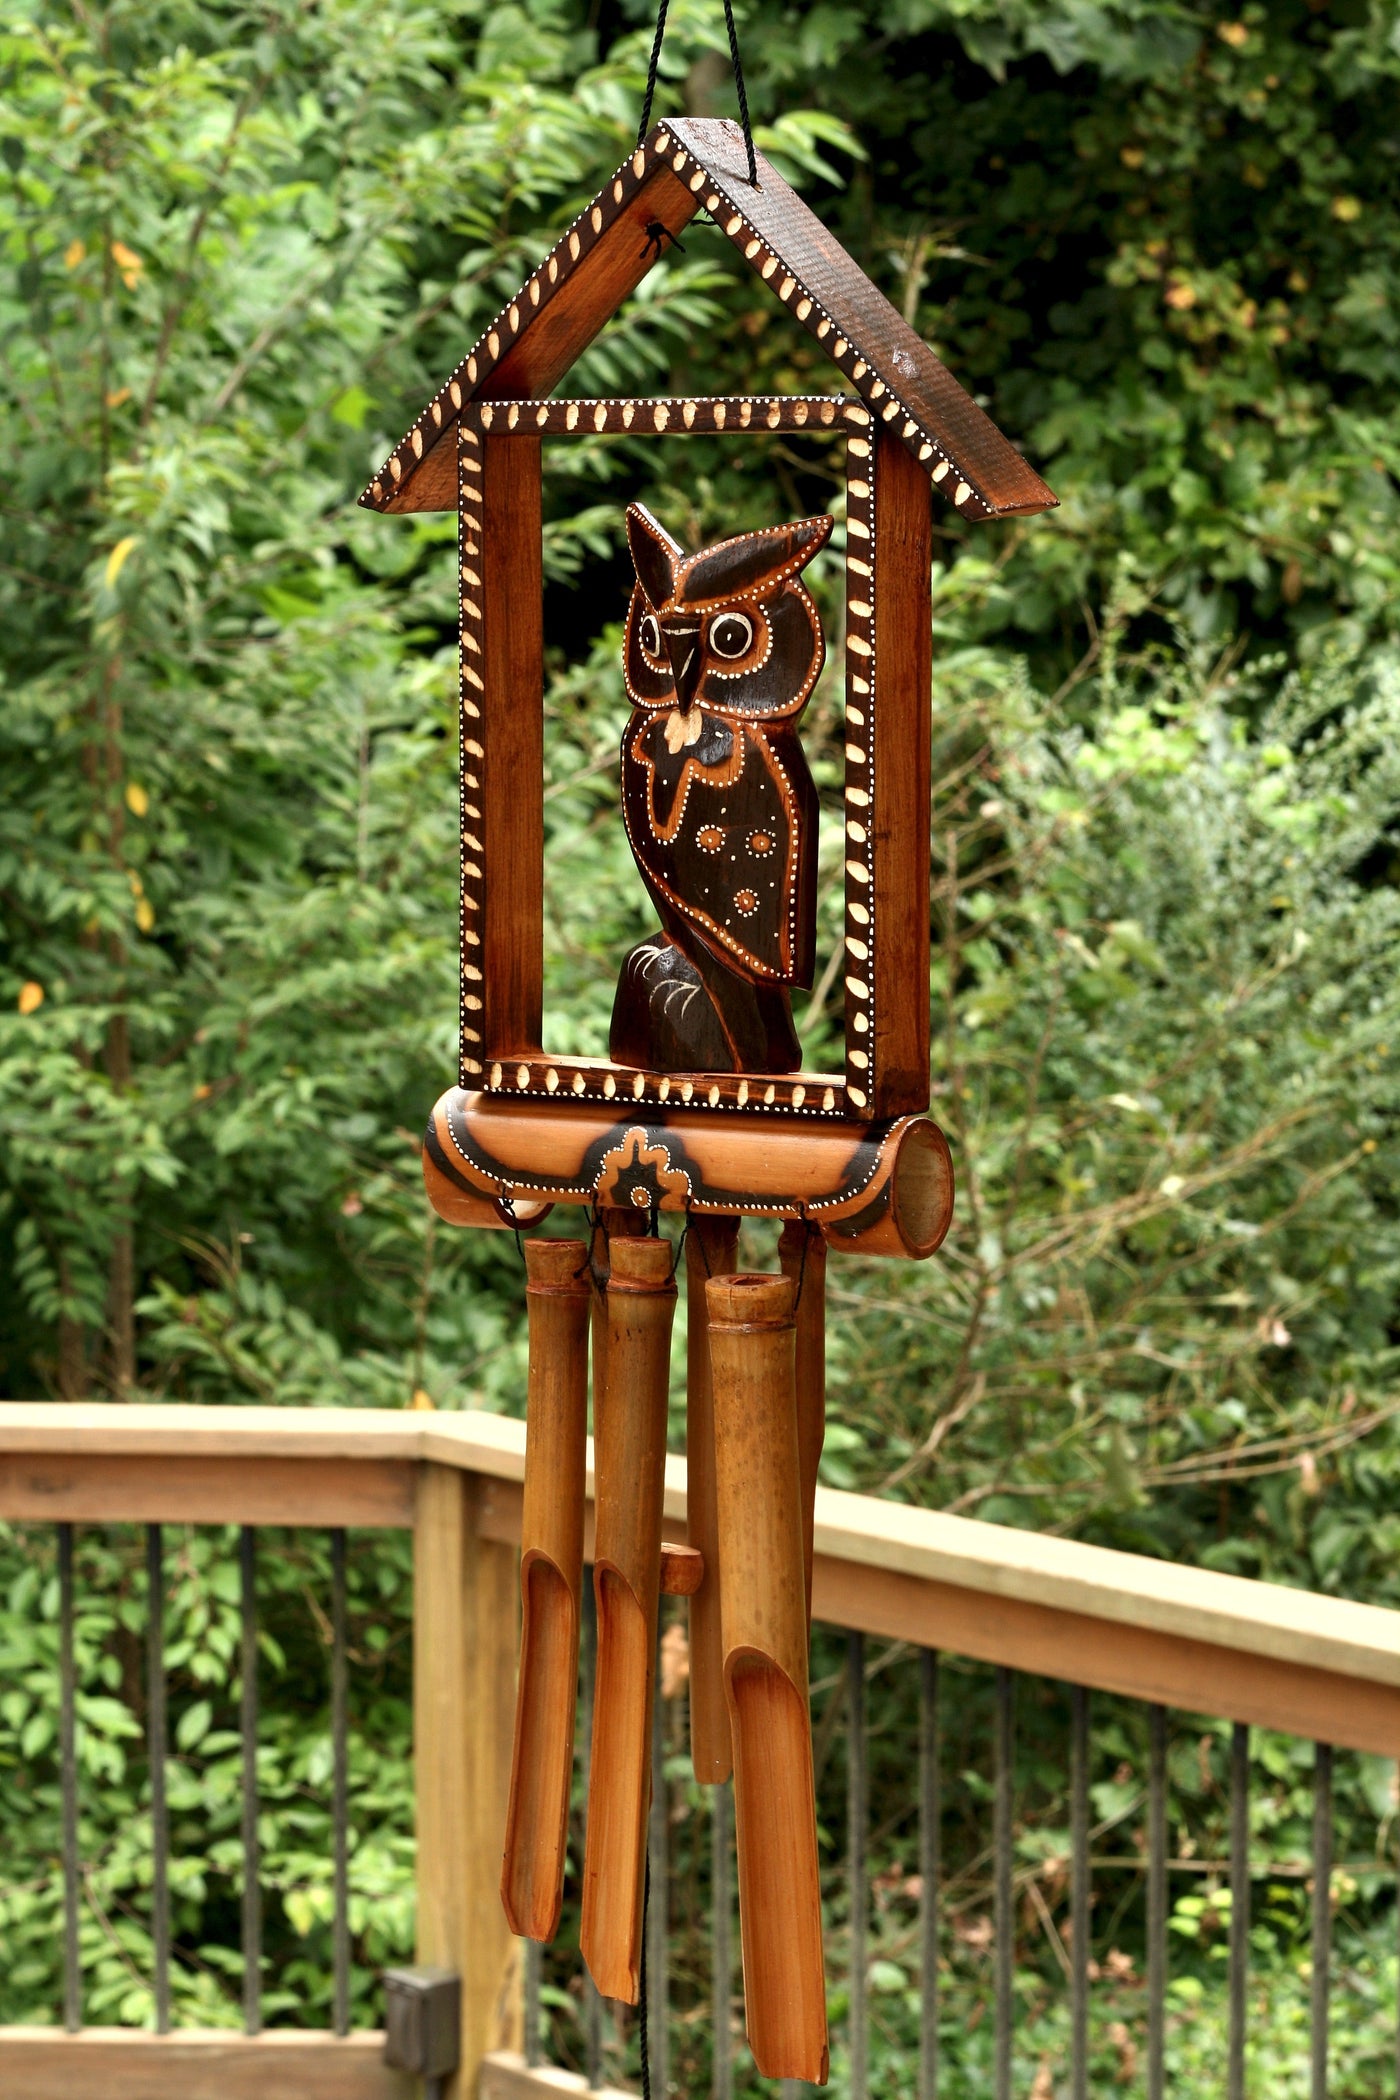 Handmade Wooden Owl House Bamboo Wind Chime Wood Statue Figurine Hoot Sculpture Decorative Rustic Patio Garden Outdoor Decor Handcrafted Decoration